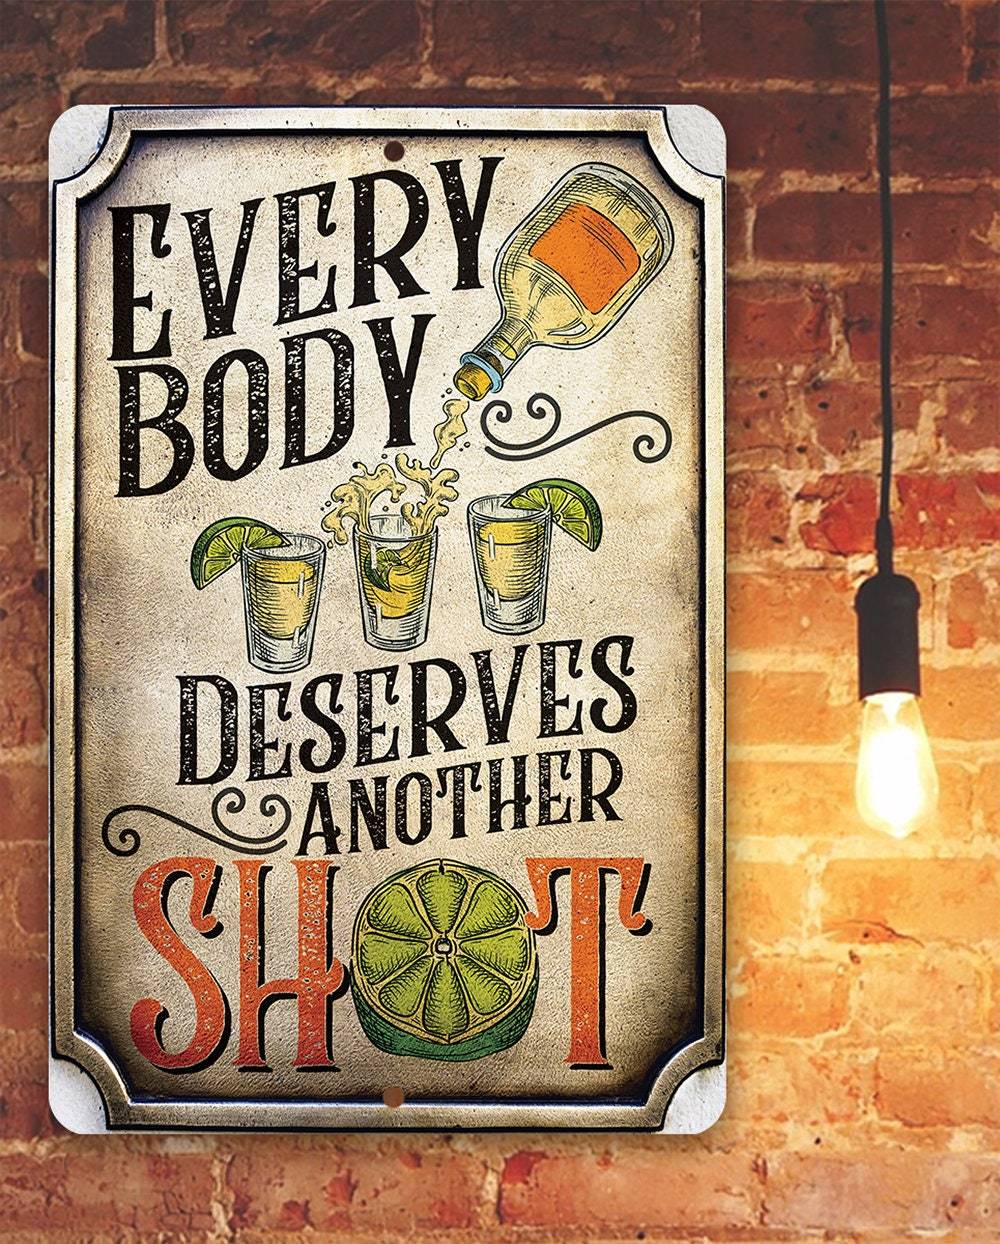 Everybody Deserves Another Shot - Metal Sign | Lone Star Art.